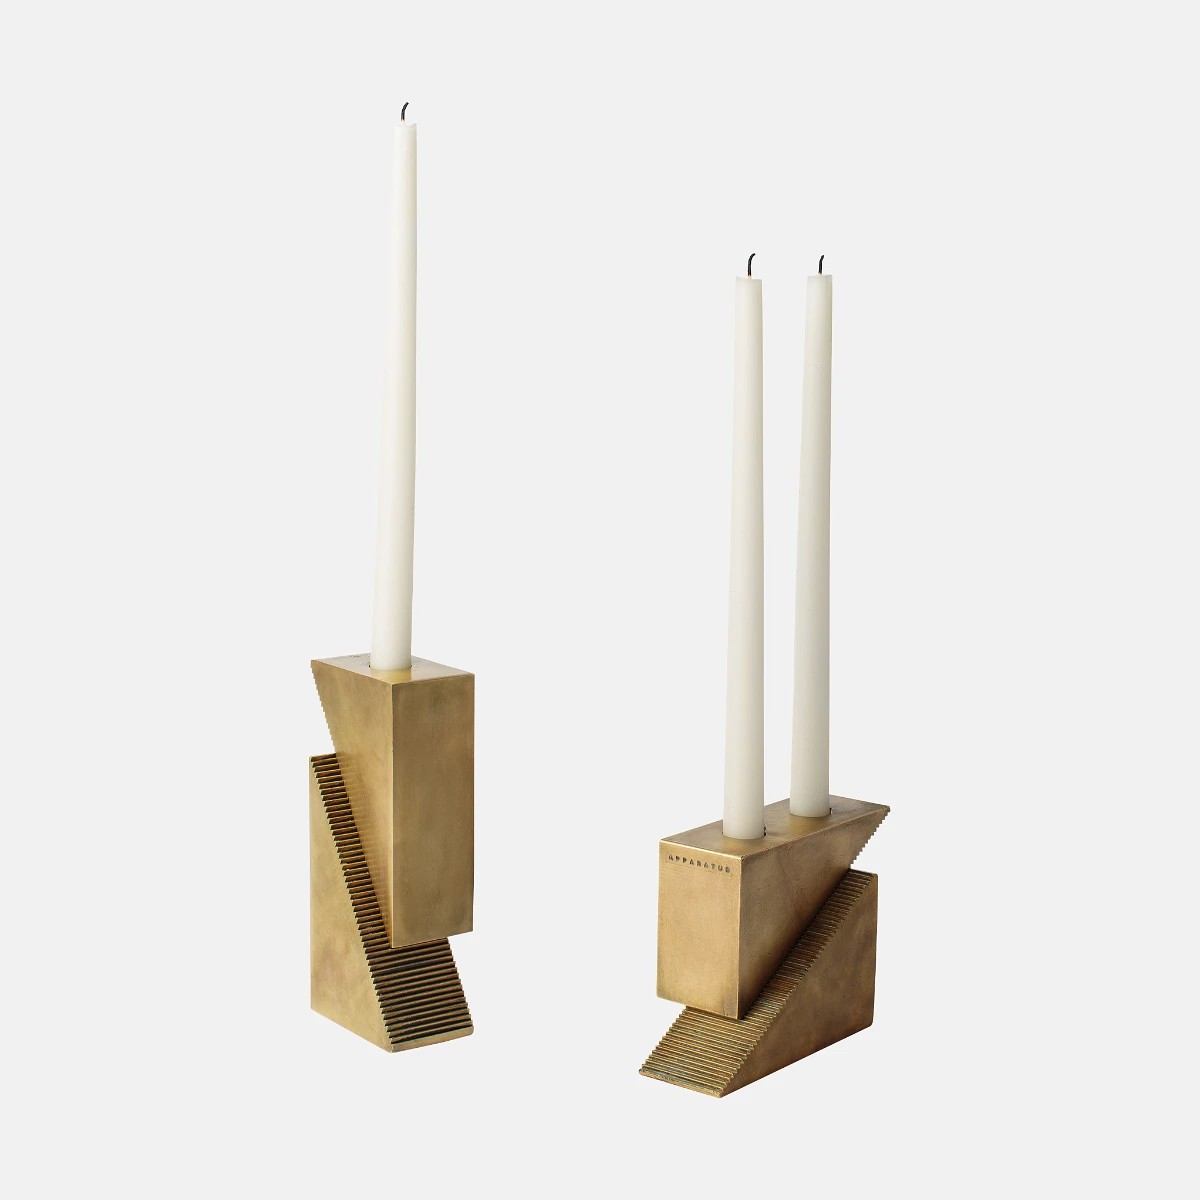 The image of an Candle Blocks product